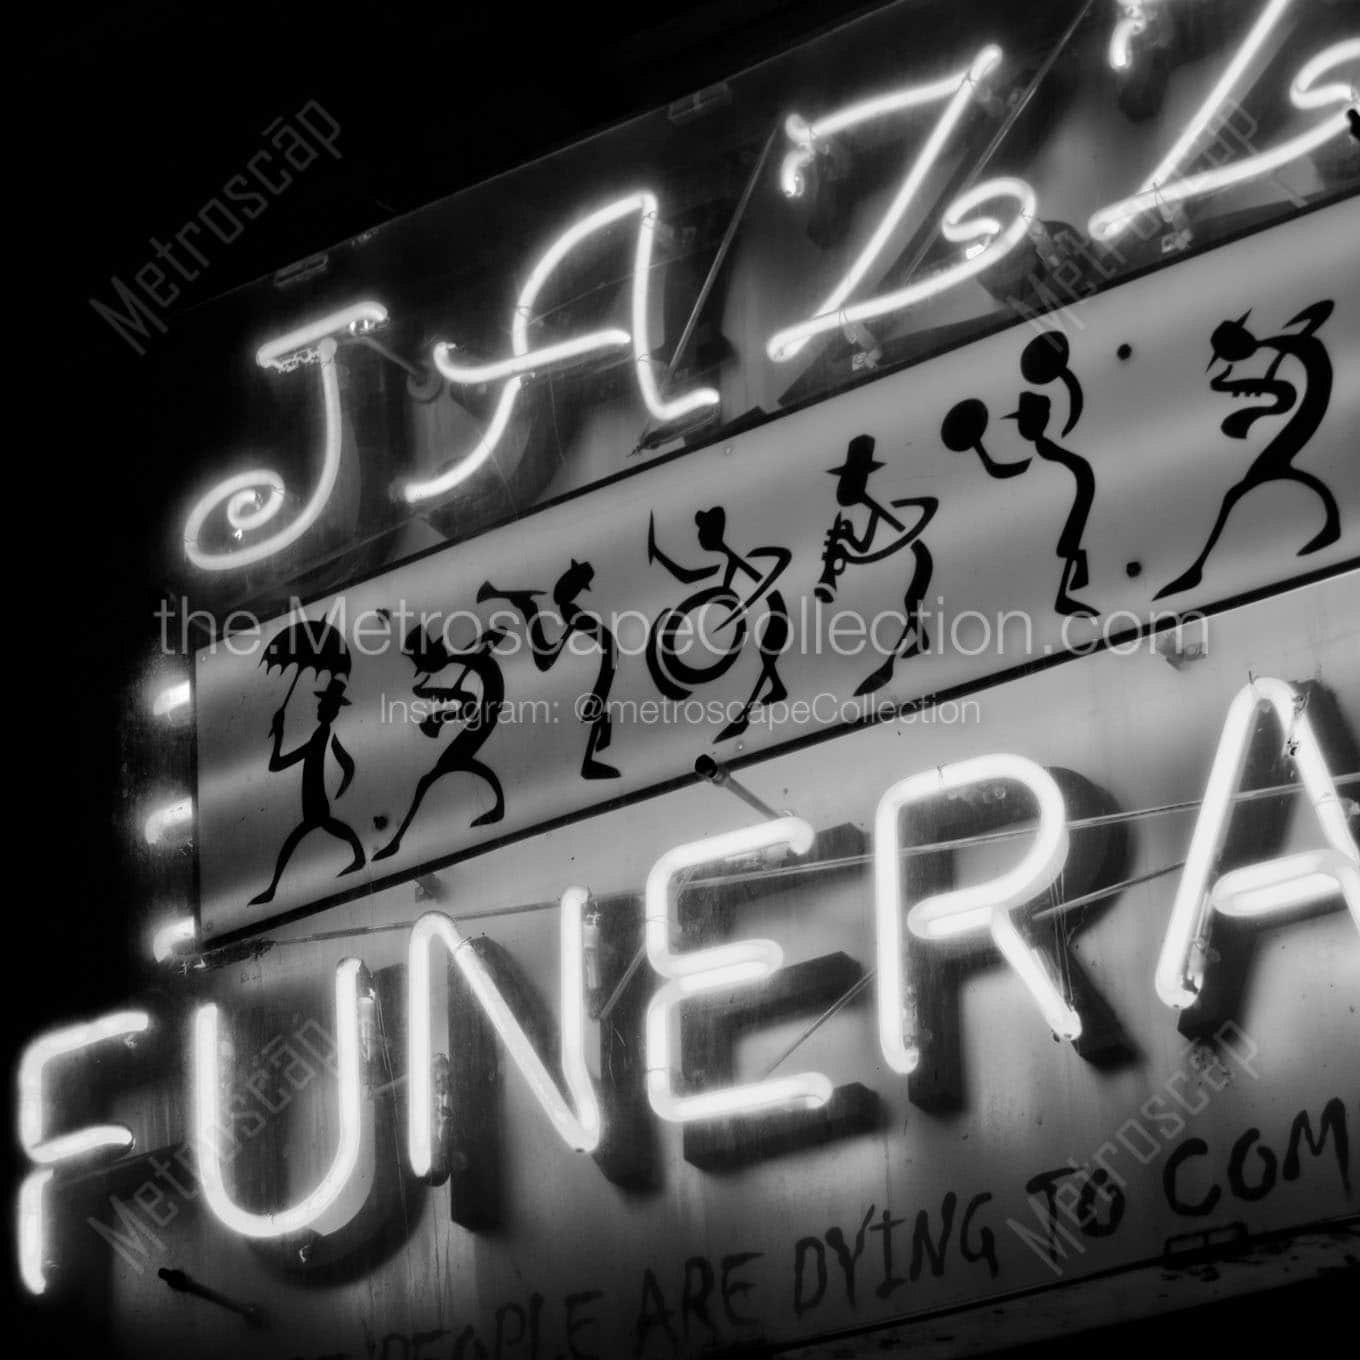 jazz funeral sign Black & White Wall Art